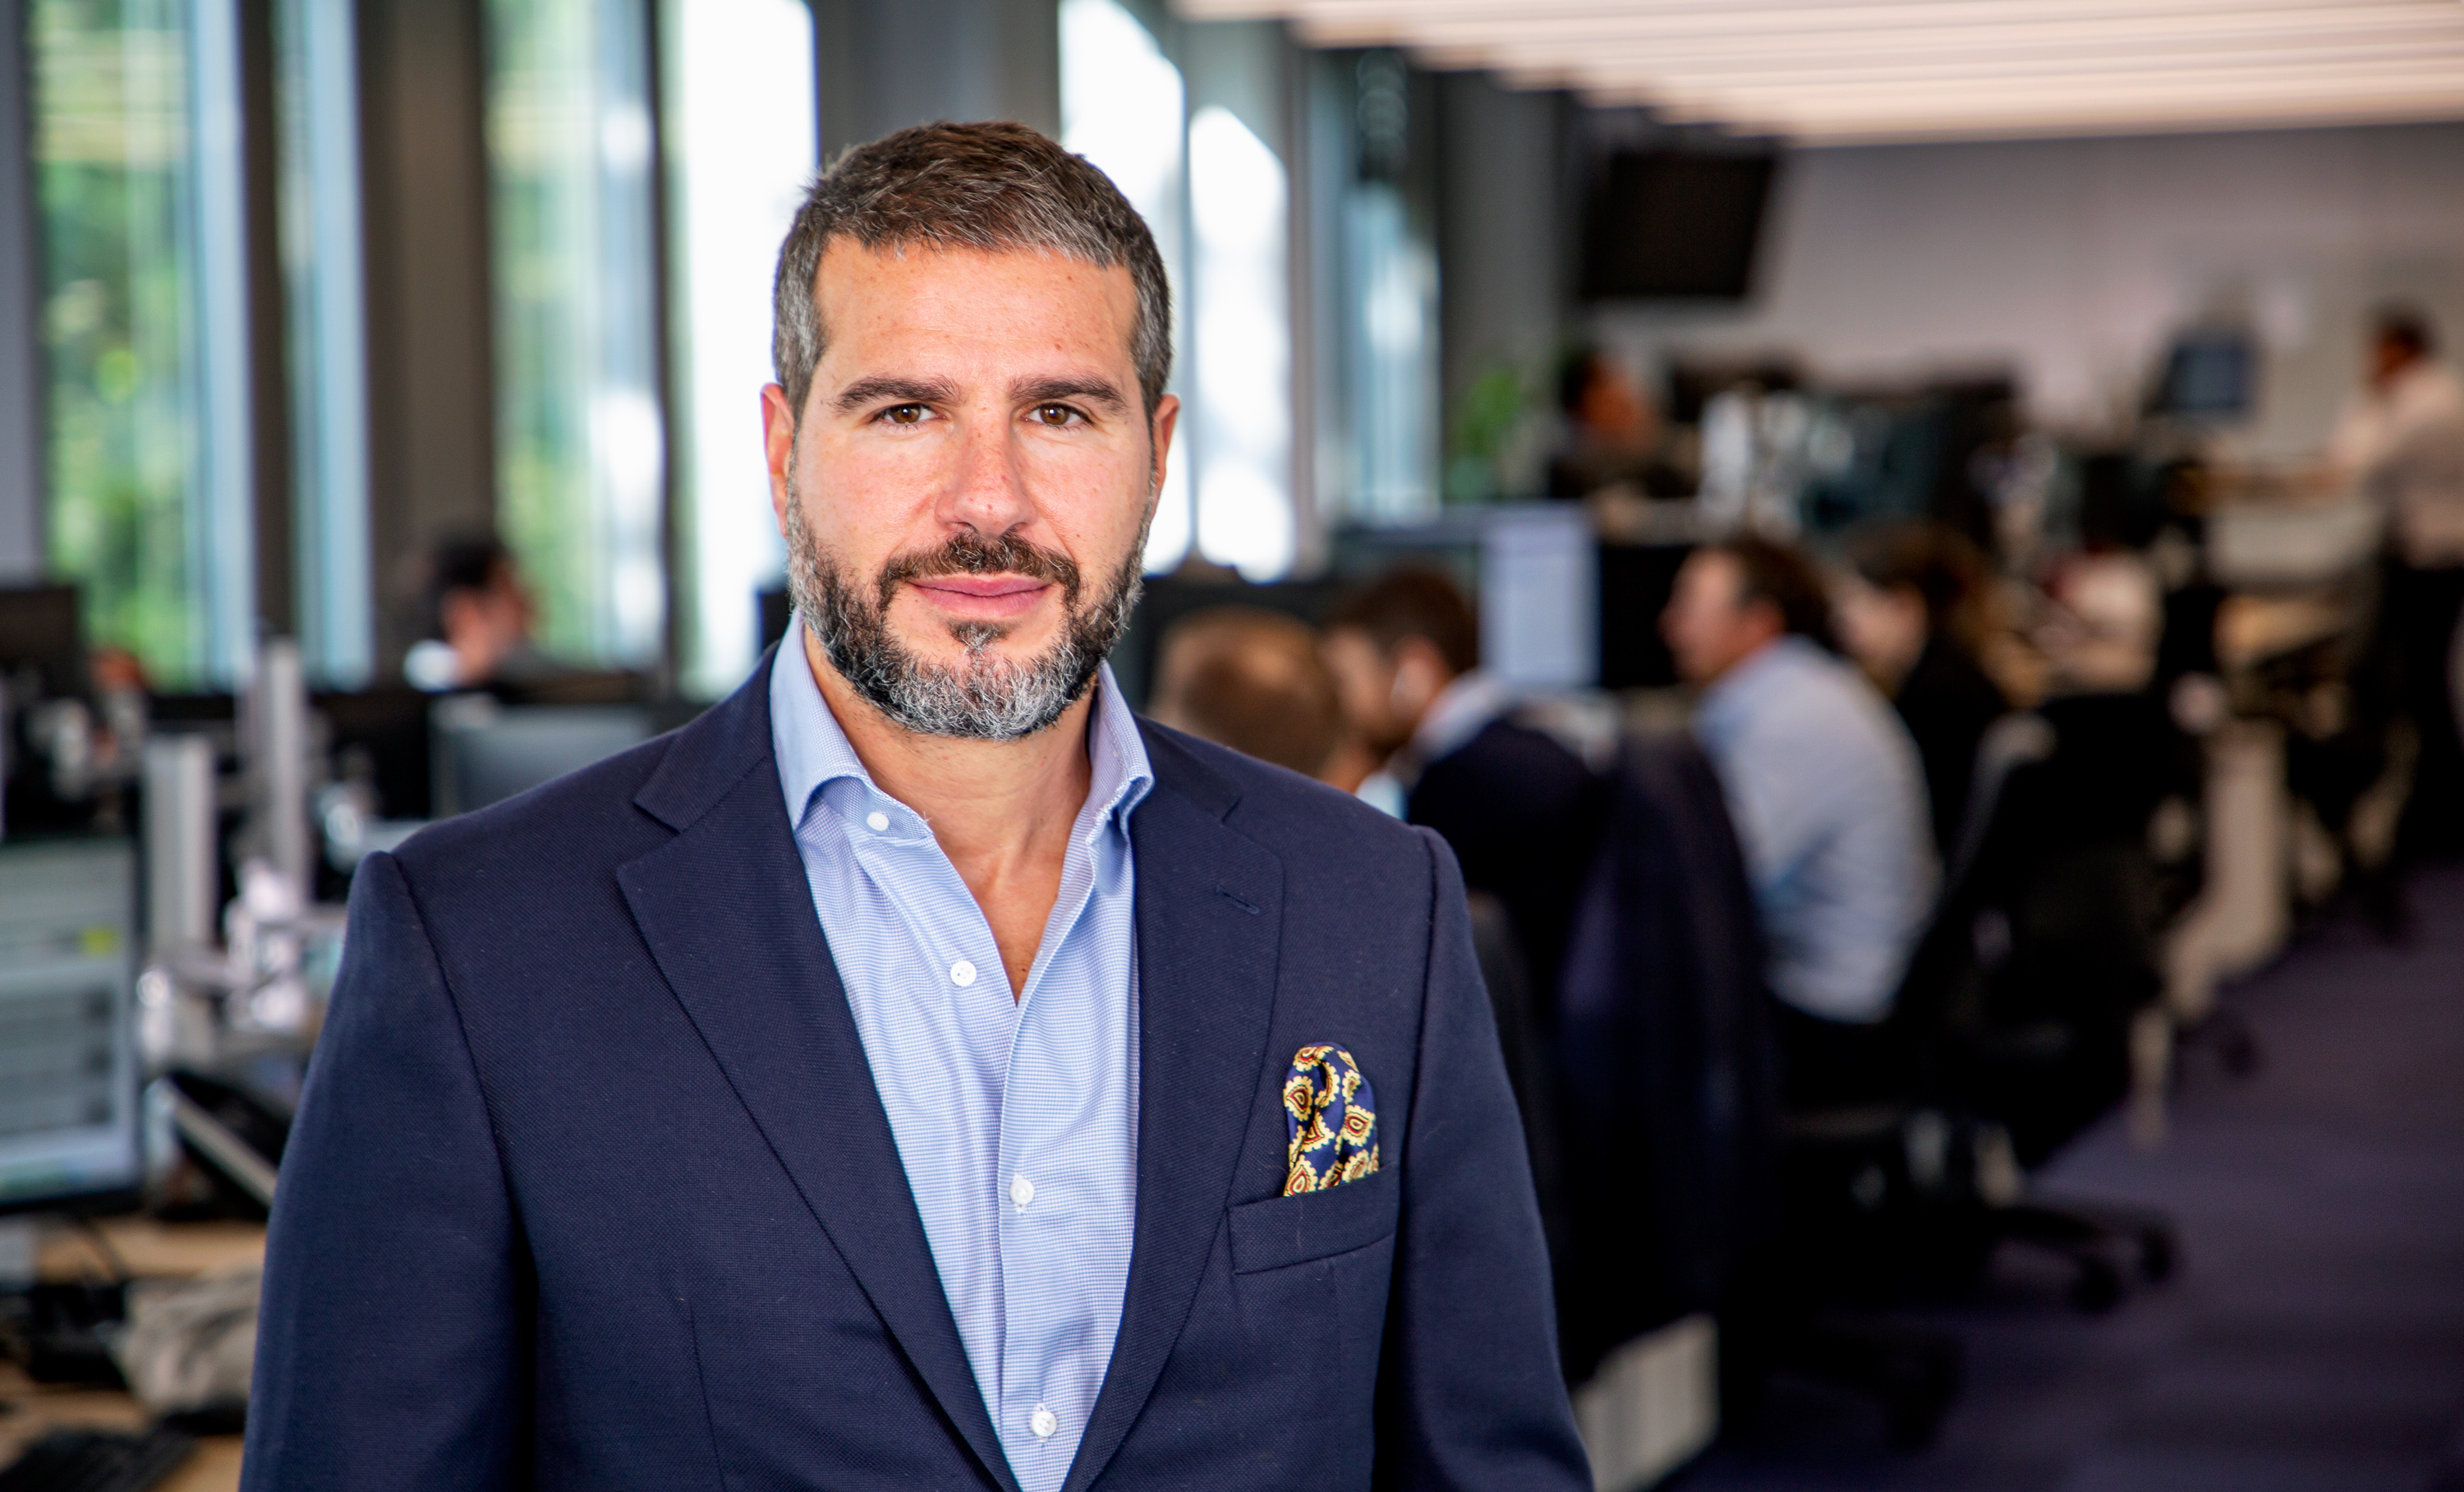 We had a good performance in 2020 and we expect to have another strong year in 2021, says Alessio La Rosa, Global Head of Freight for COFCO International.